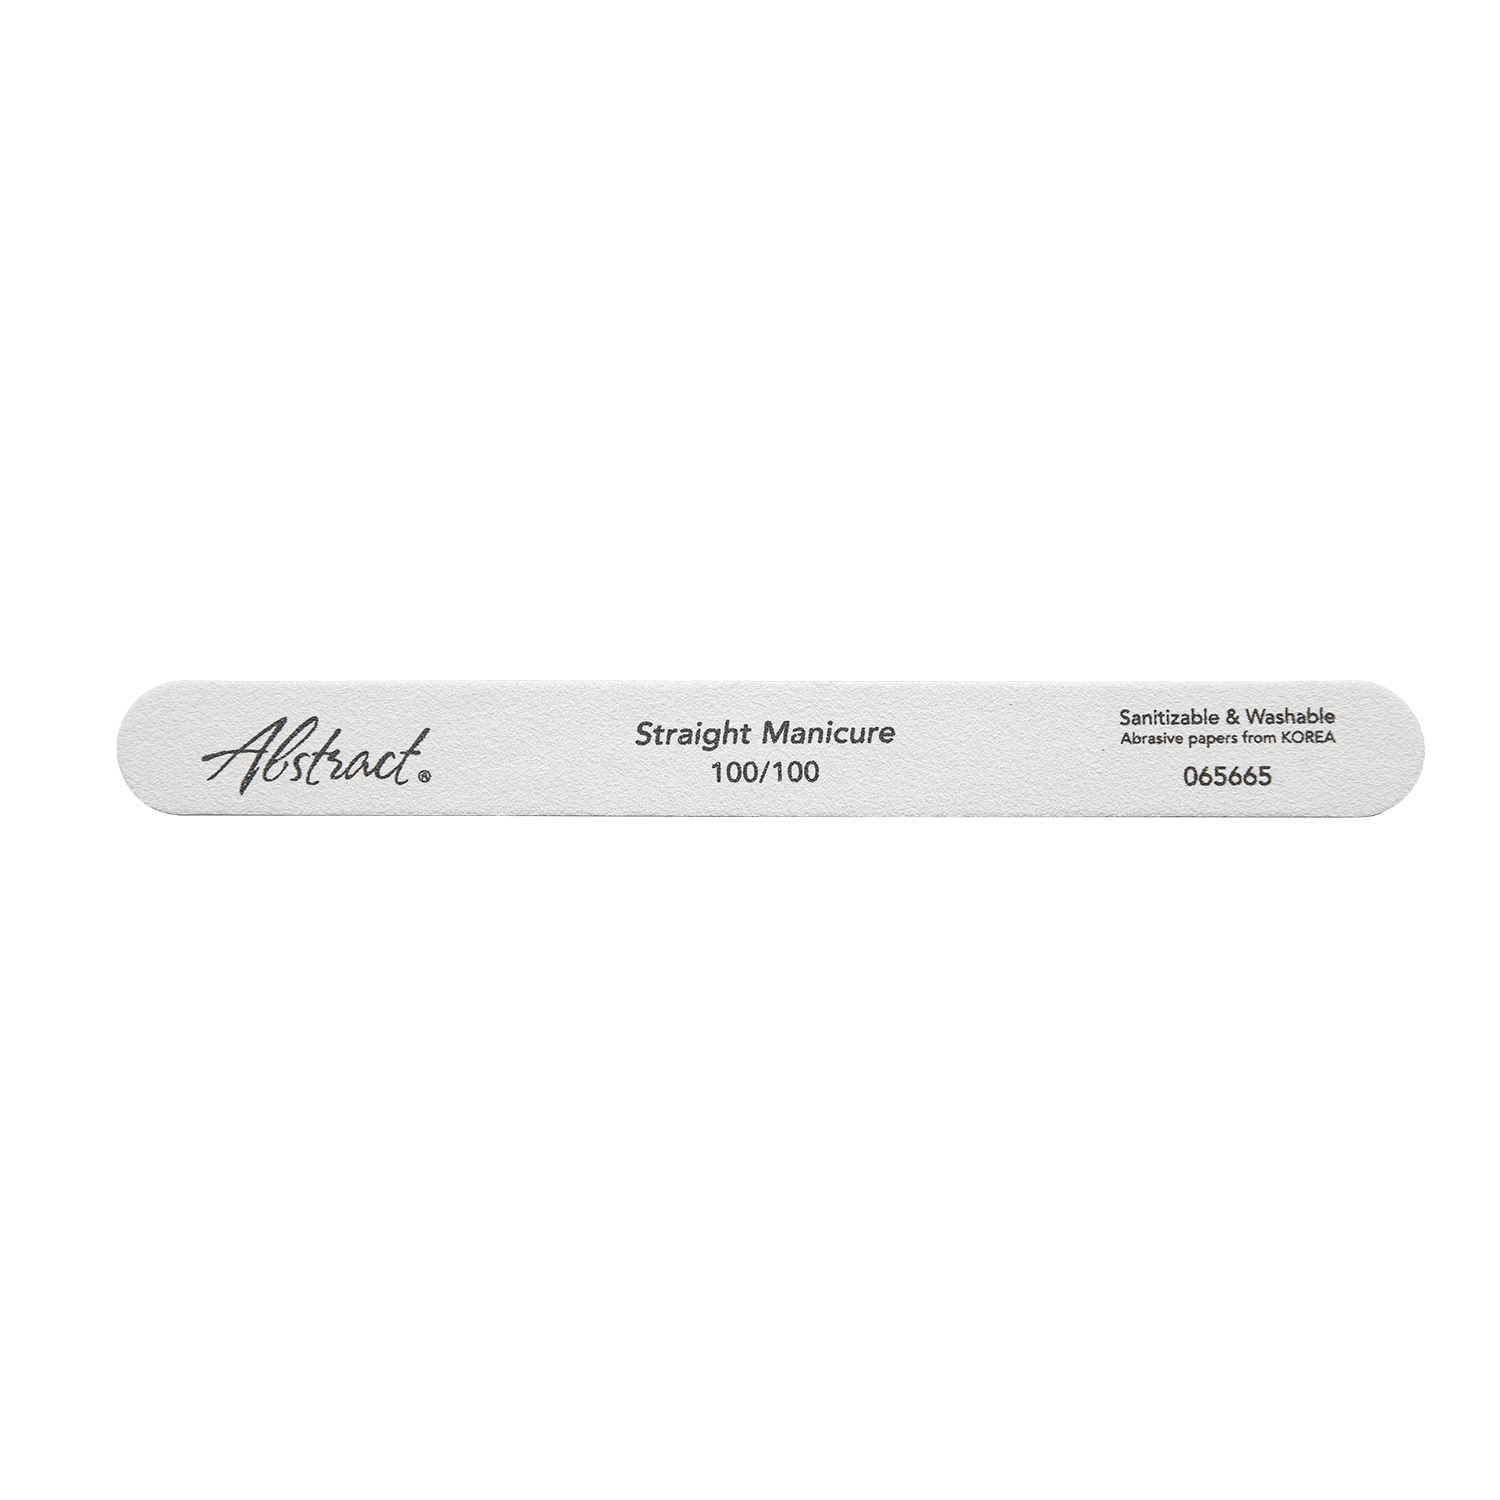 100 grit (100pk) STRAIGHT MANICURE File, Abstract | 103387